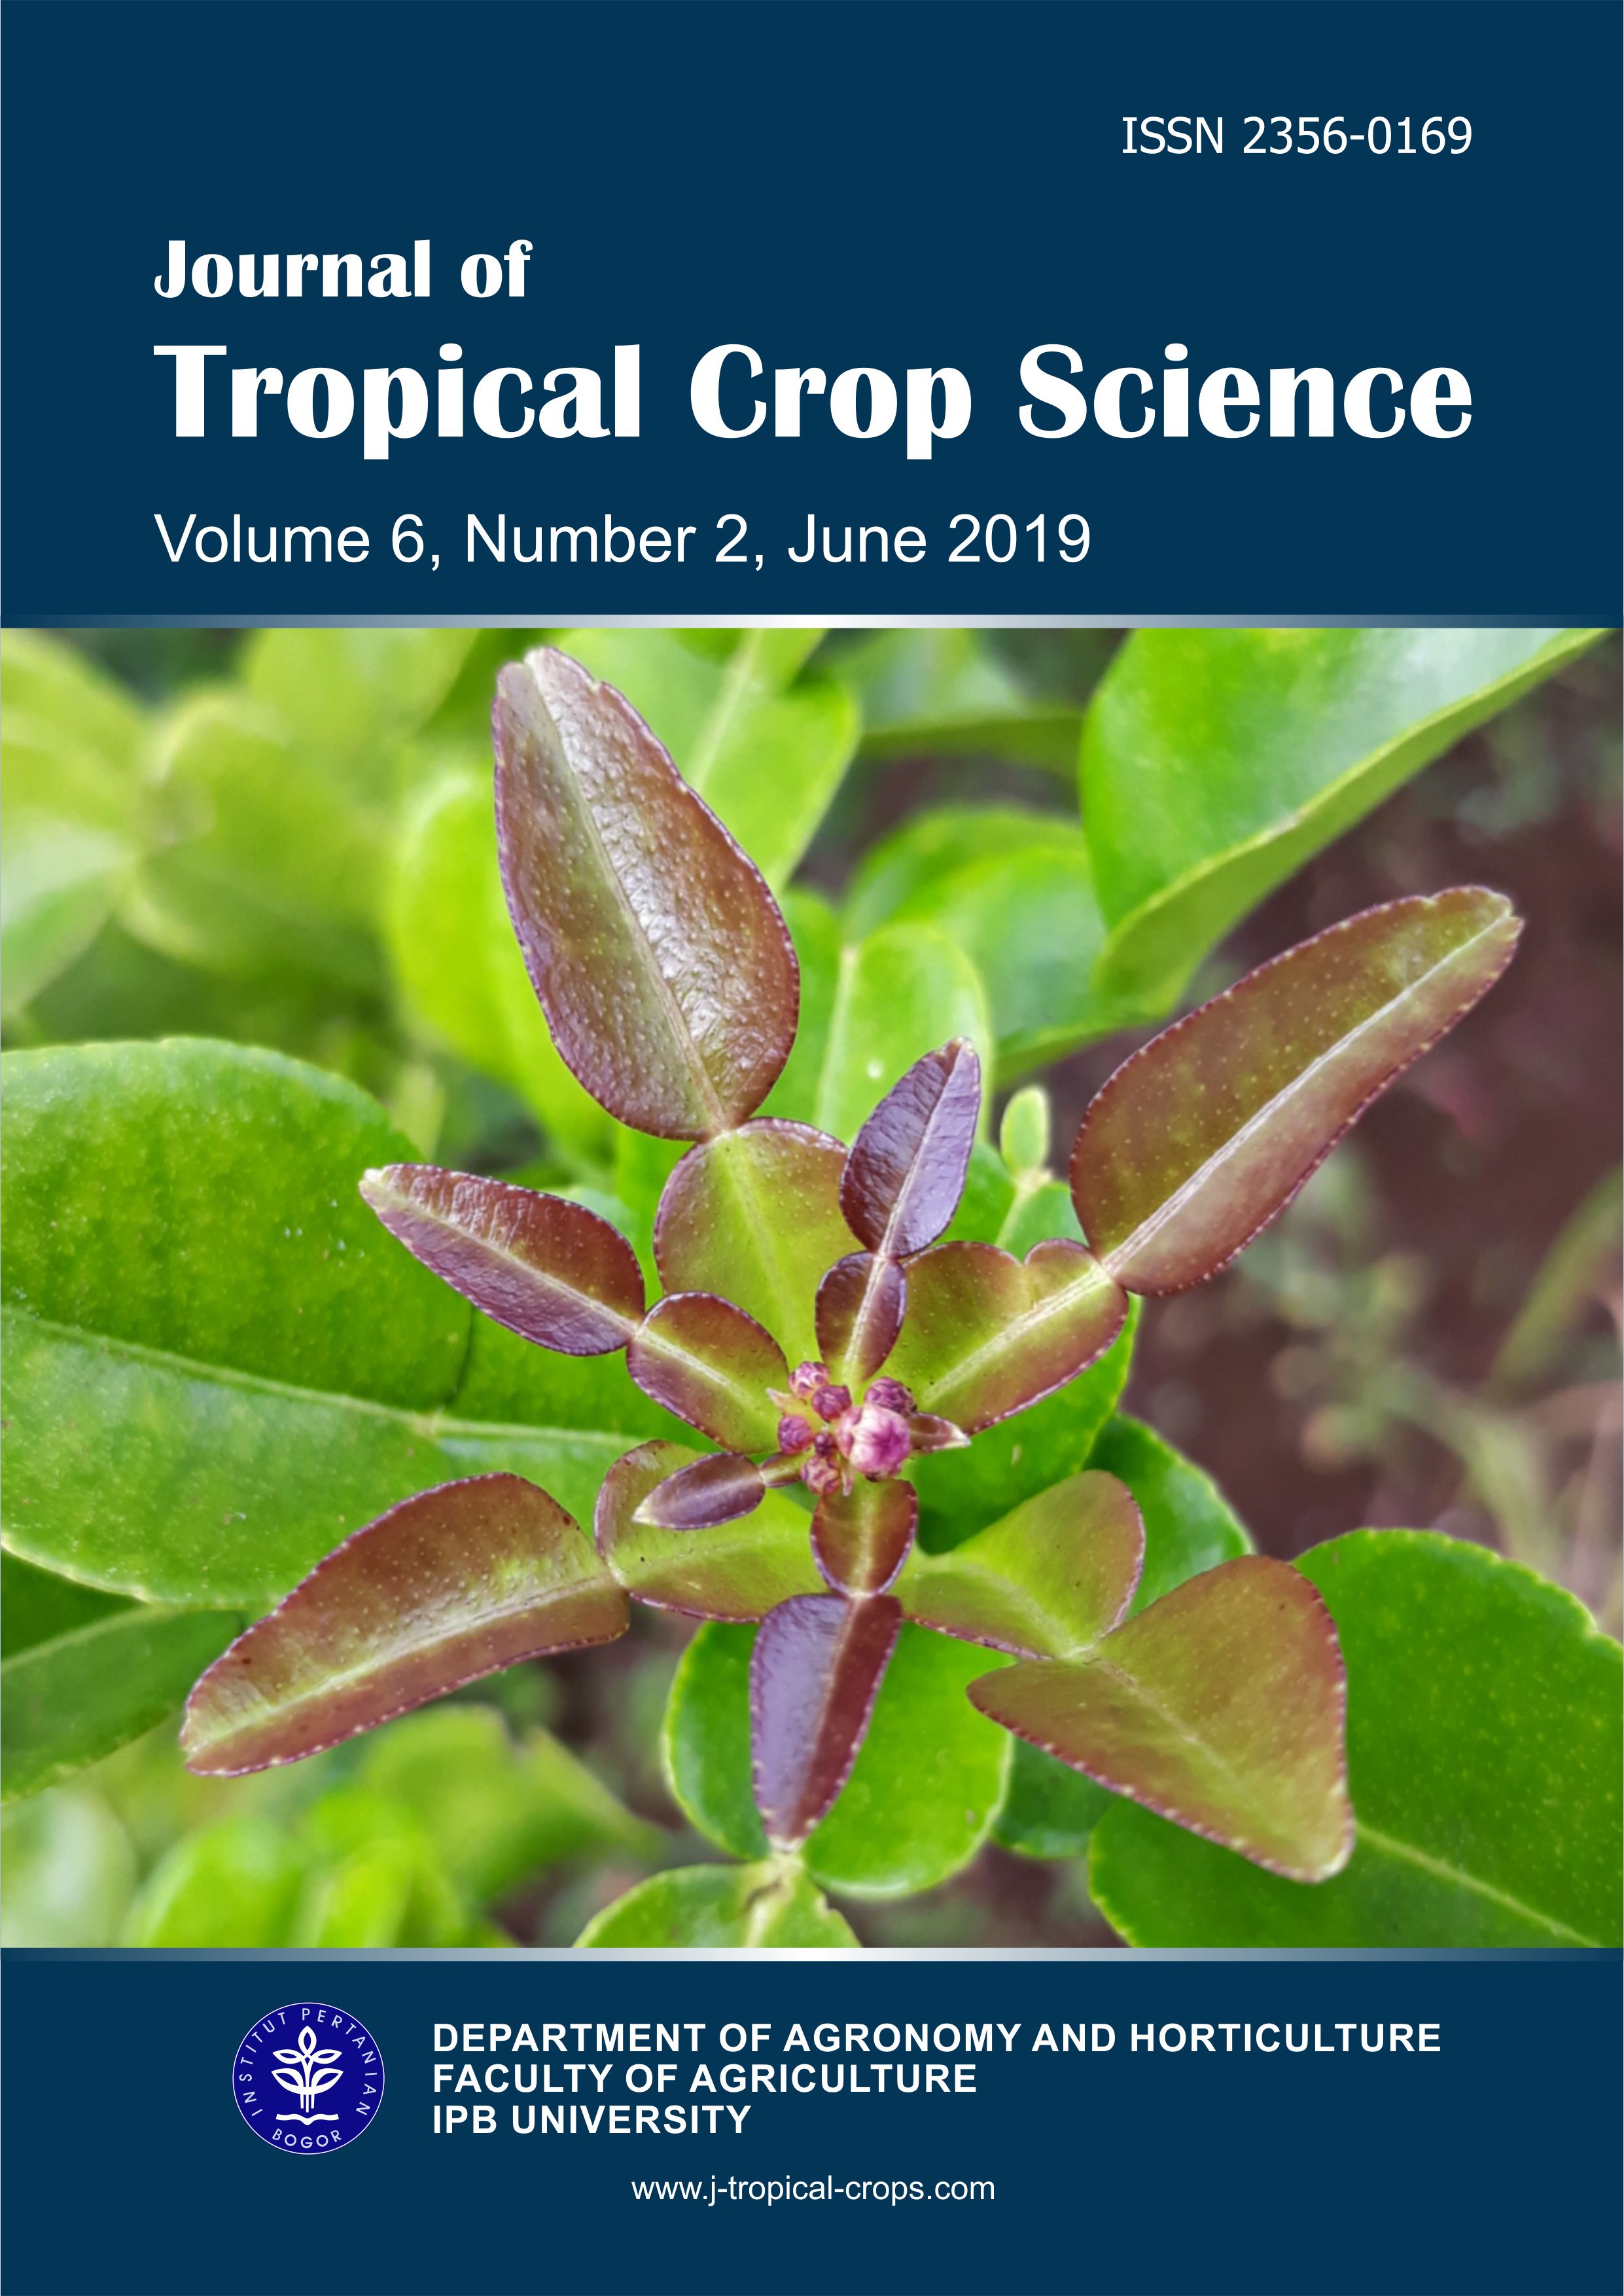 					View Vol. 6 No. 02 (2019): Journal of Tropical Crop Science
				